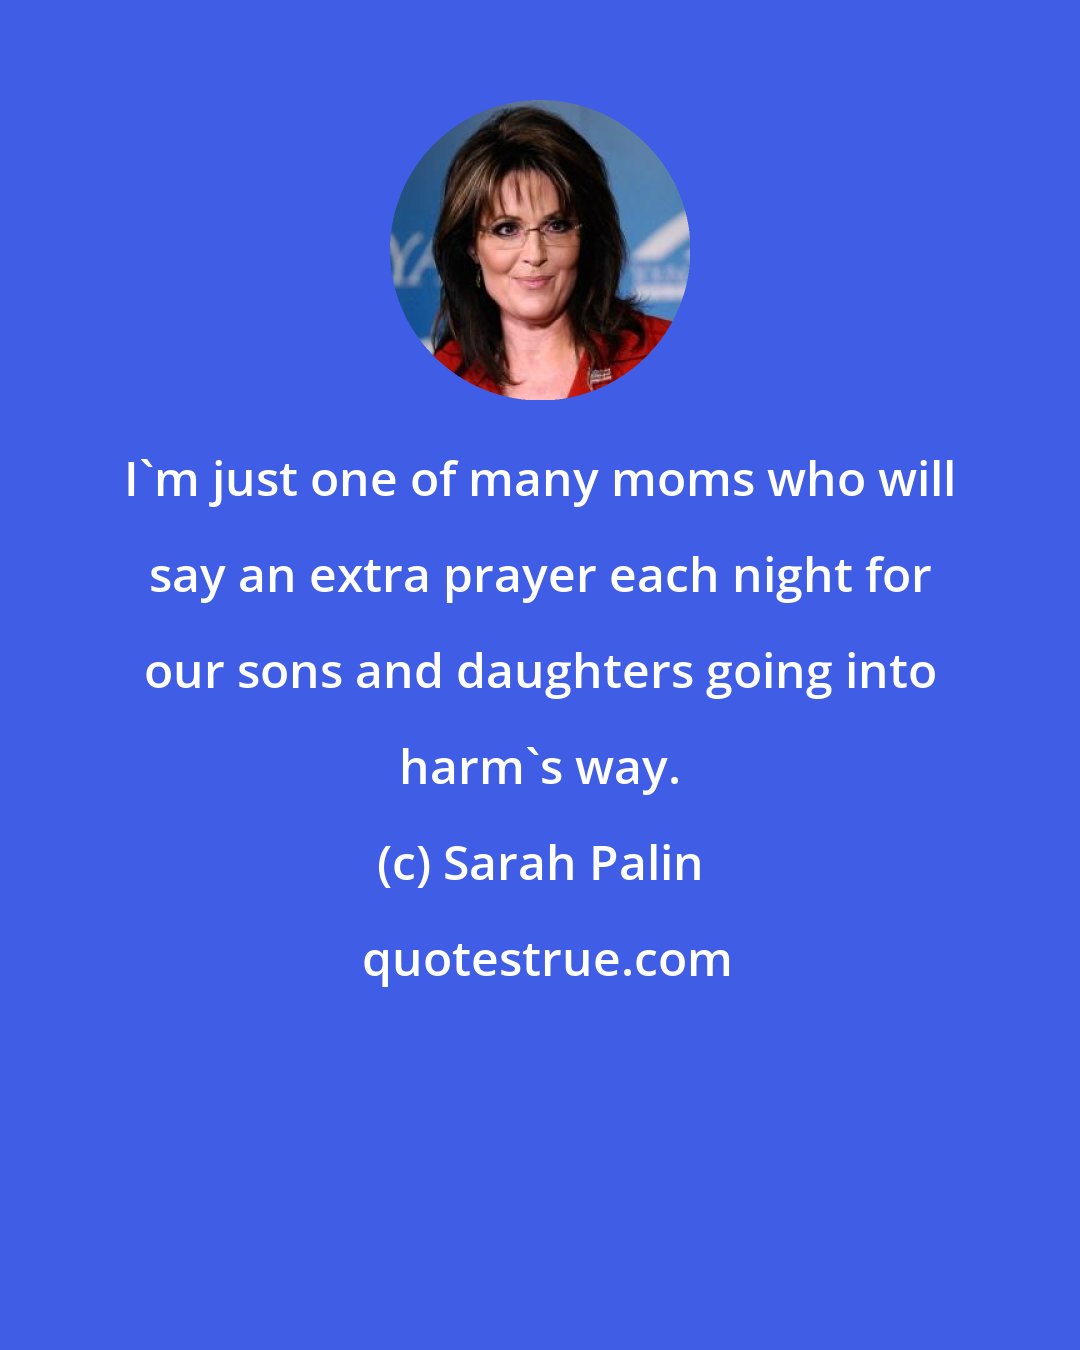 Sarah Palin: I'm just one of many moms who will say an extra prayer each night for our sons and daughters going into harm's way.